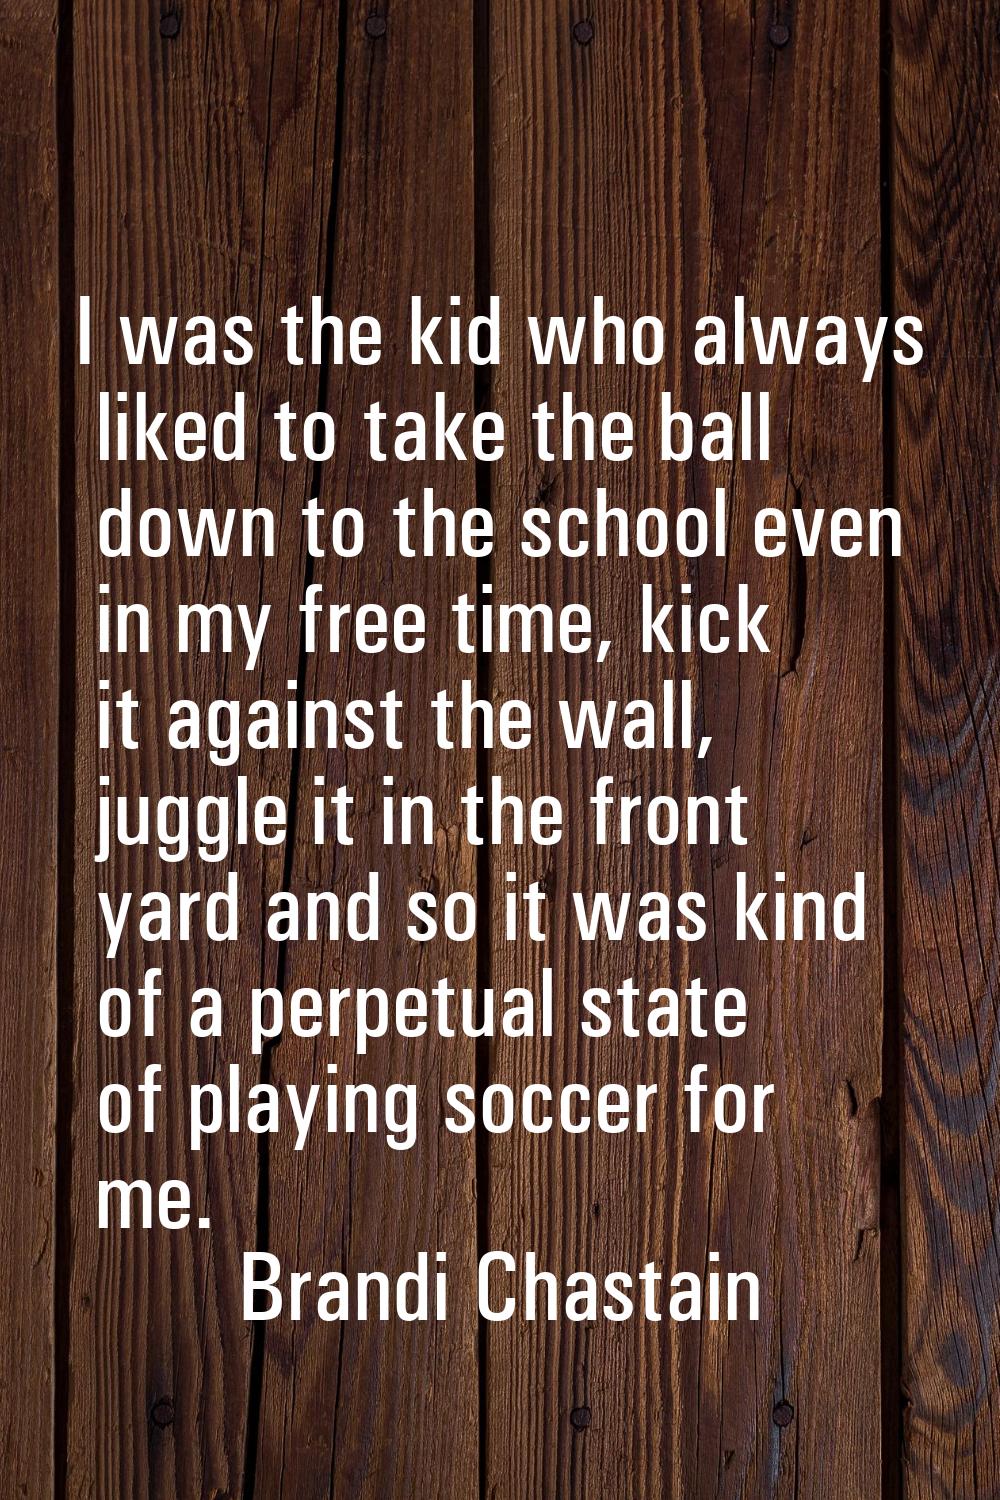 I was the kid who always liked to take the ball down to the school even in my free time, kick it ag